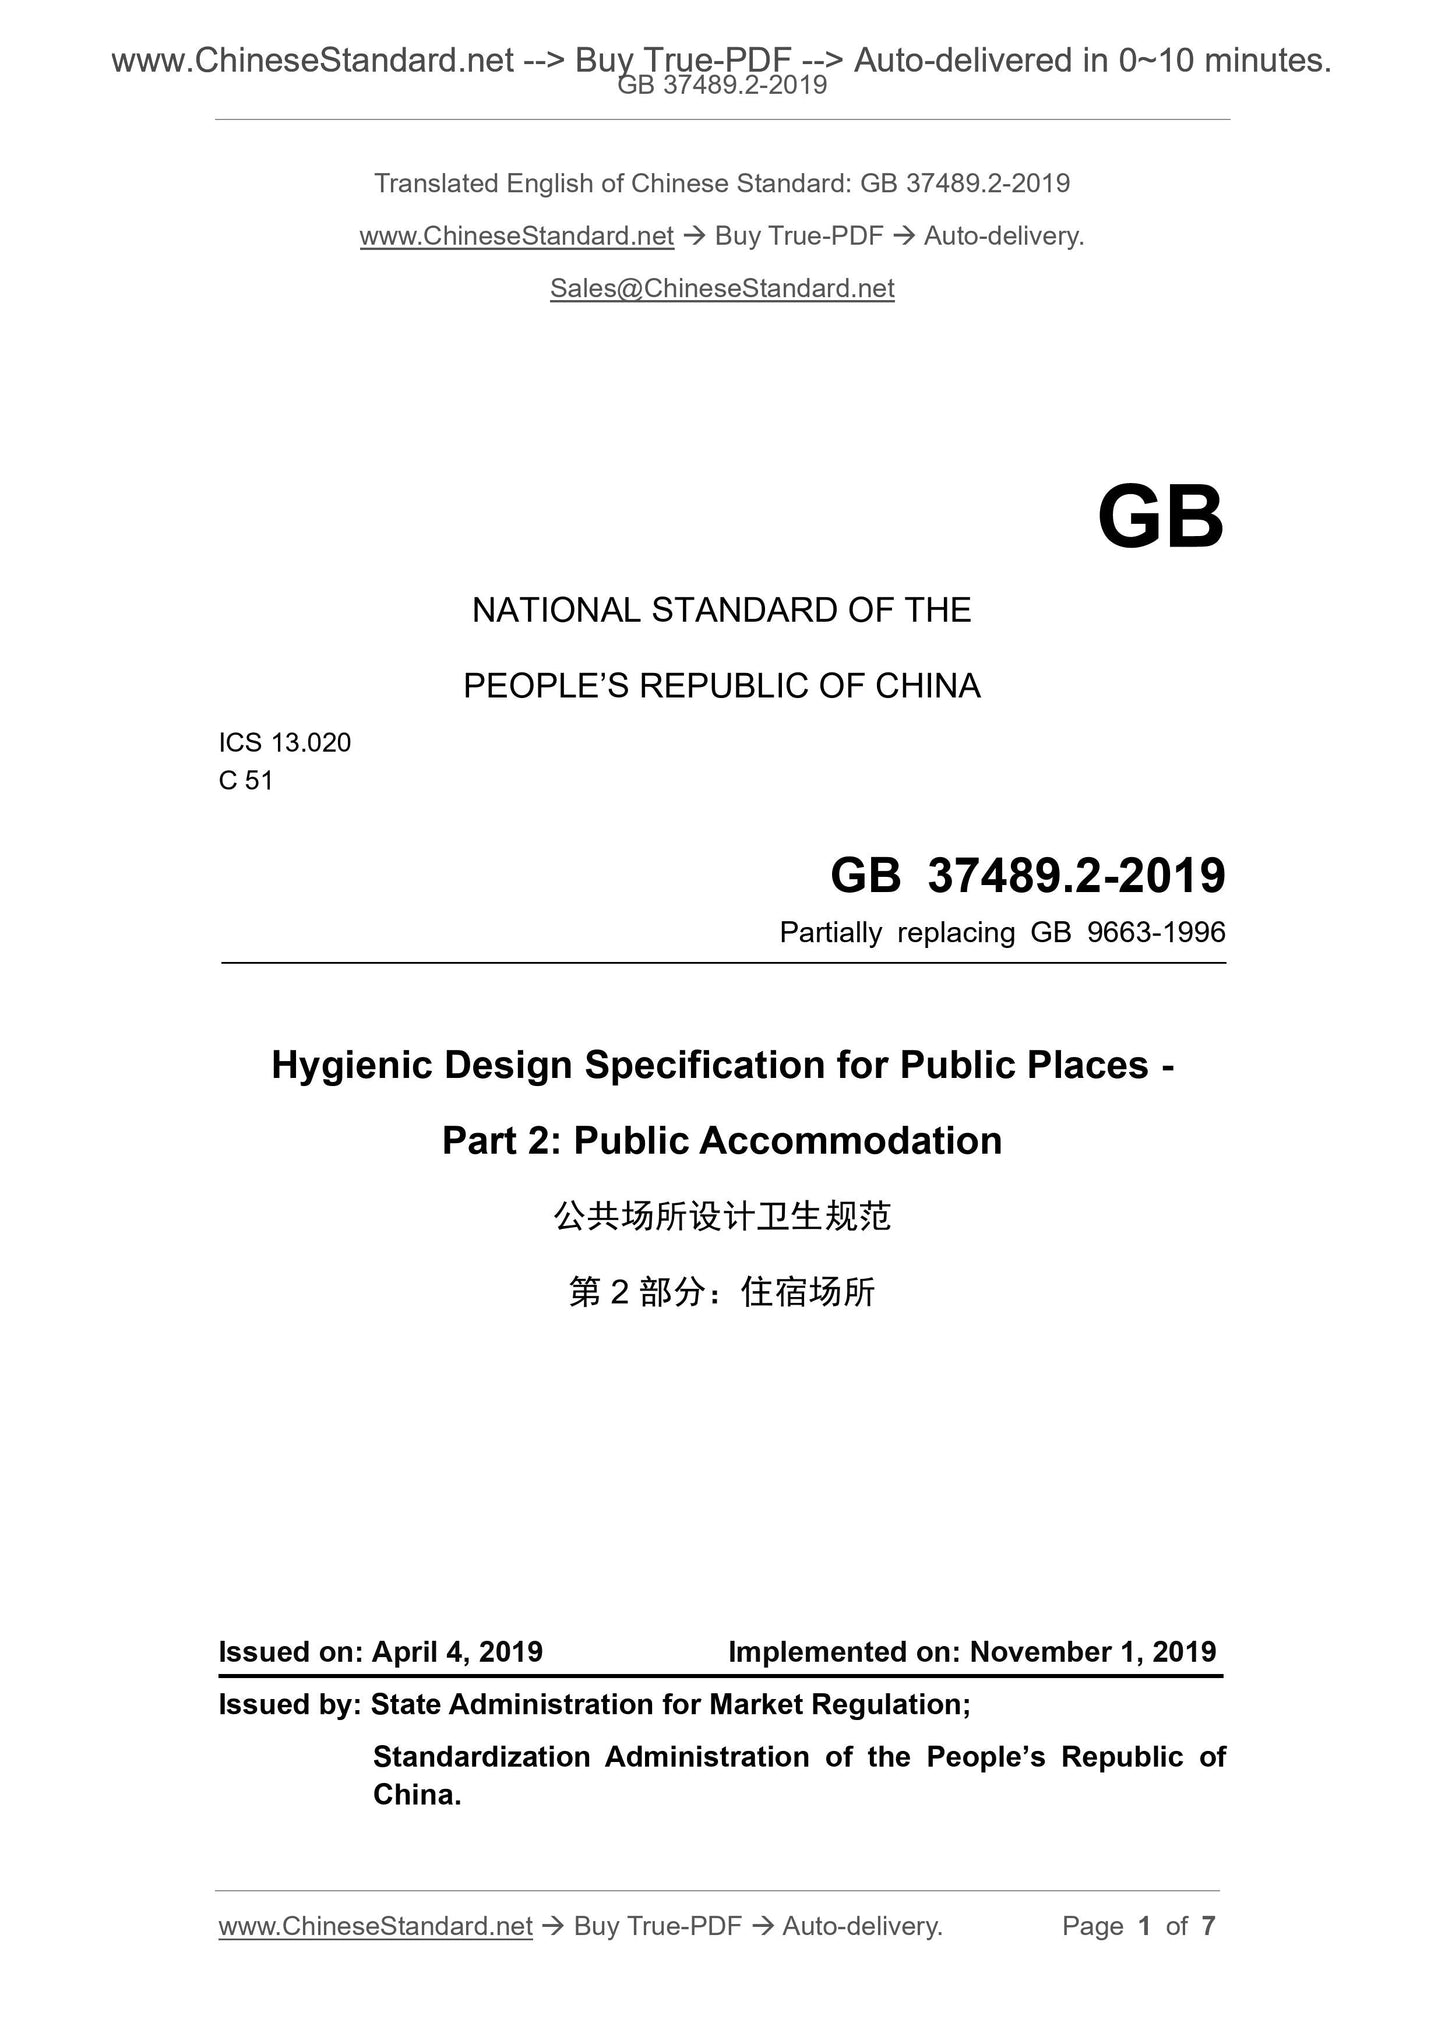 GB 37489.2-2019 Page 1